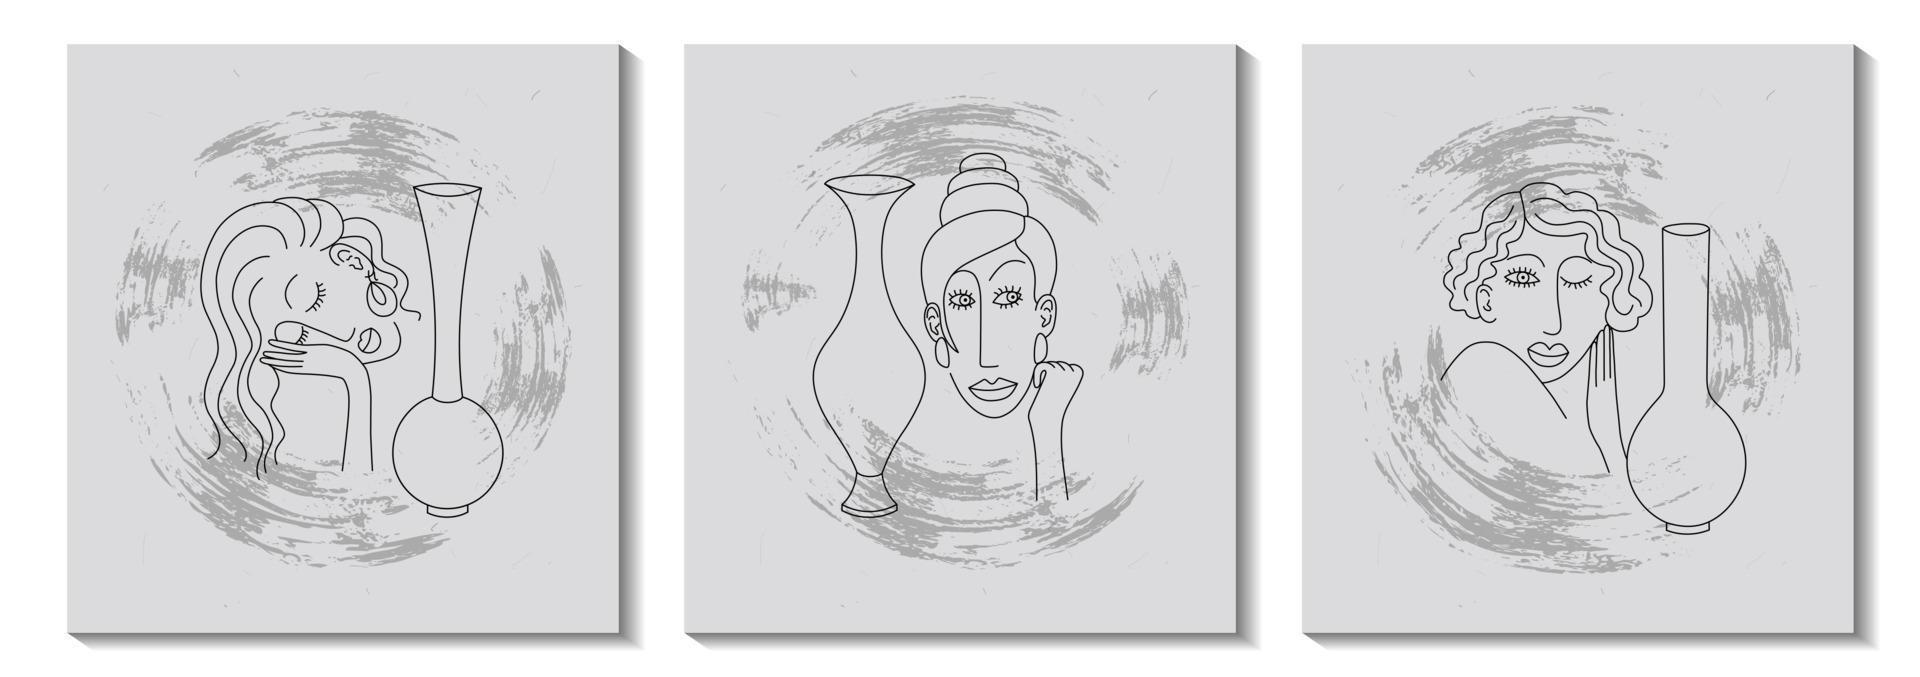 Set of drawings with modern abstract faces. Fashionable outlines of women silhouettes with vases. Hand-drawn outlines of vector illustrations of girls. Minimalistic concept. Monochrome banner. Grey.